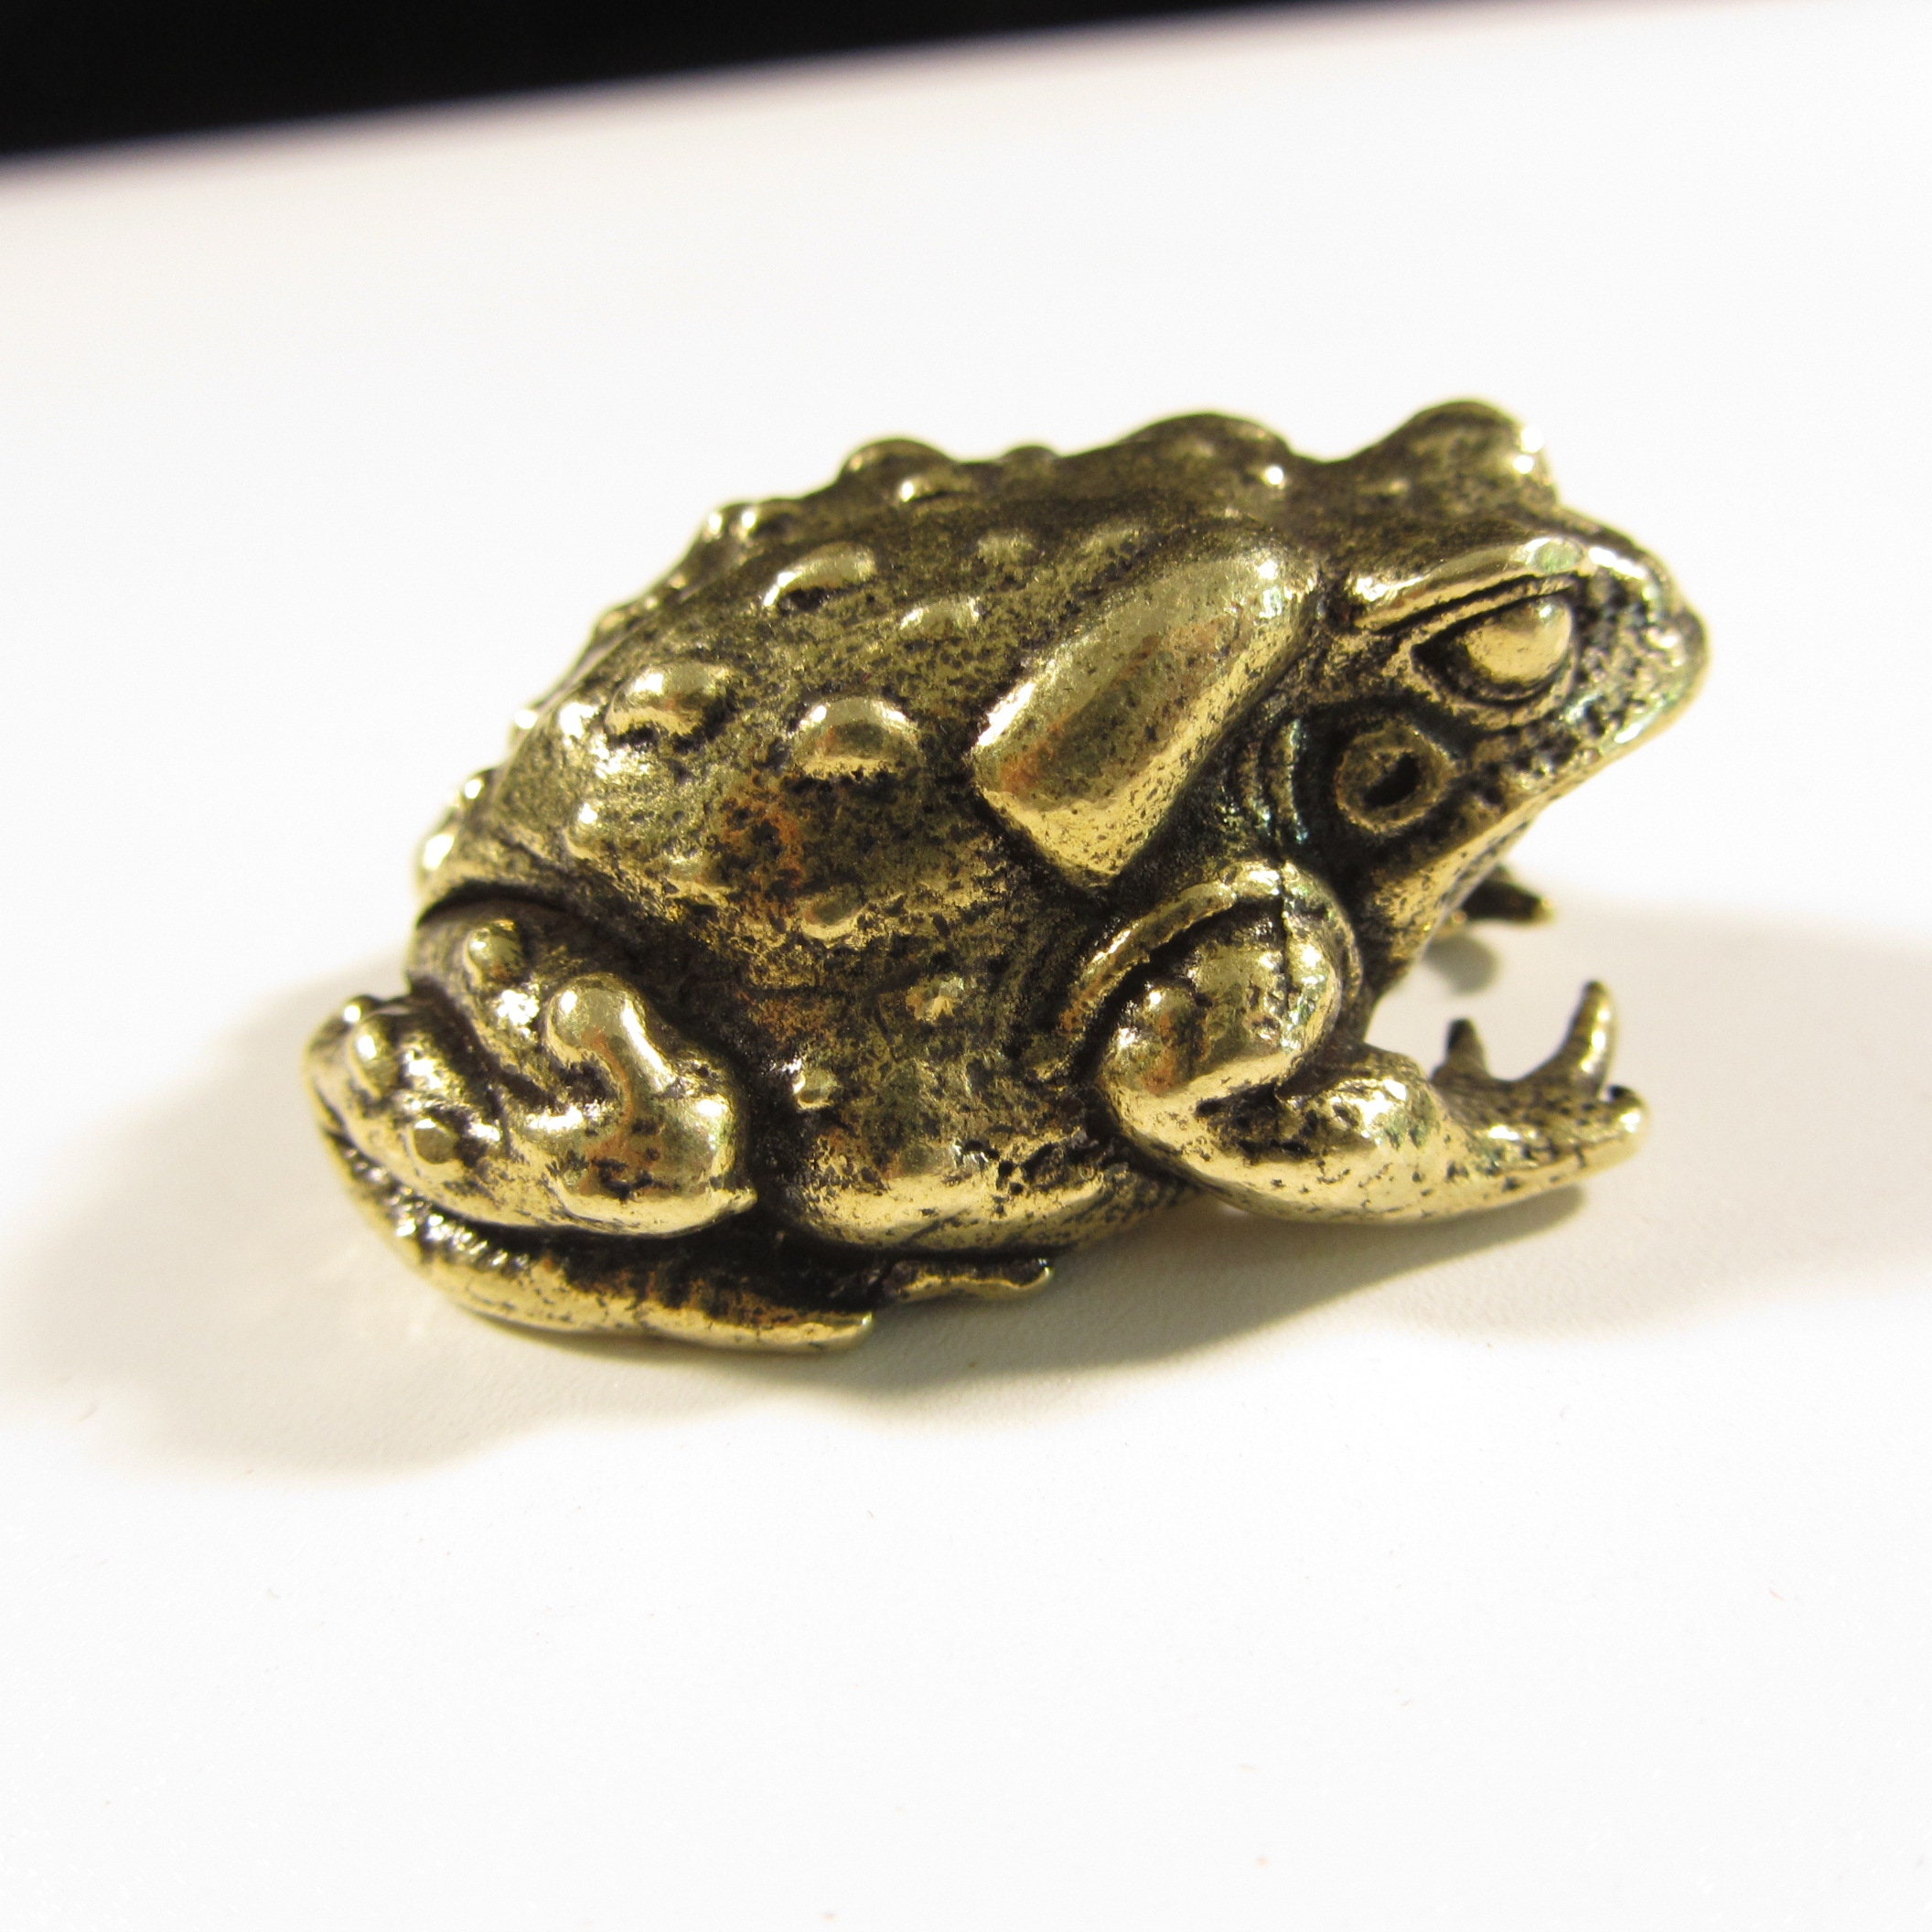 Collectable Brass Mini Frog Miniatures Figurines Vintage Copper Animal Stature 